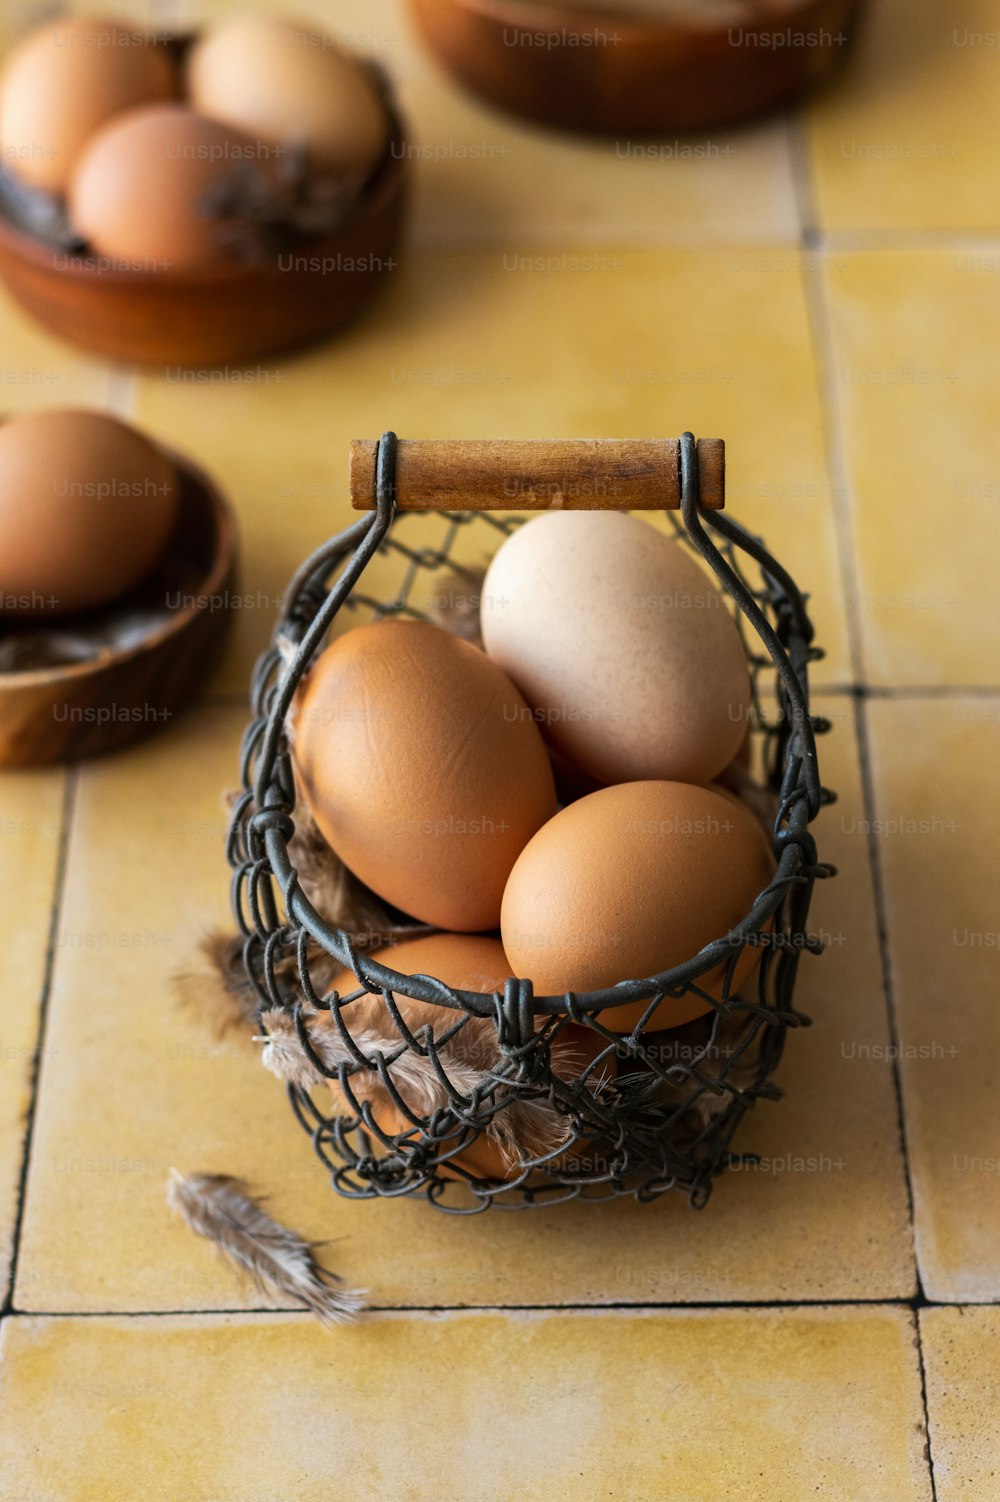 a basket of eggs sitting on top of a tiled floor